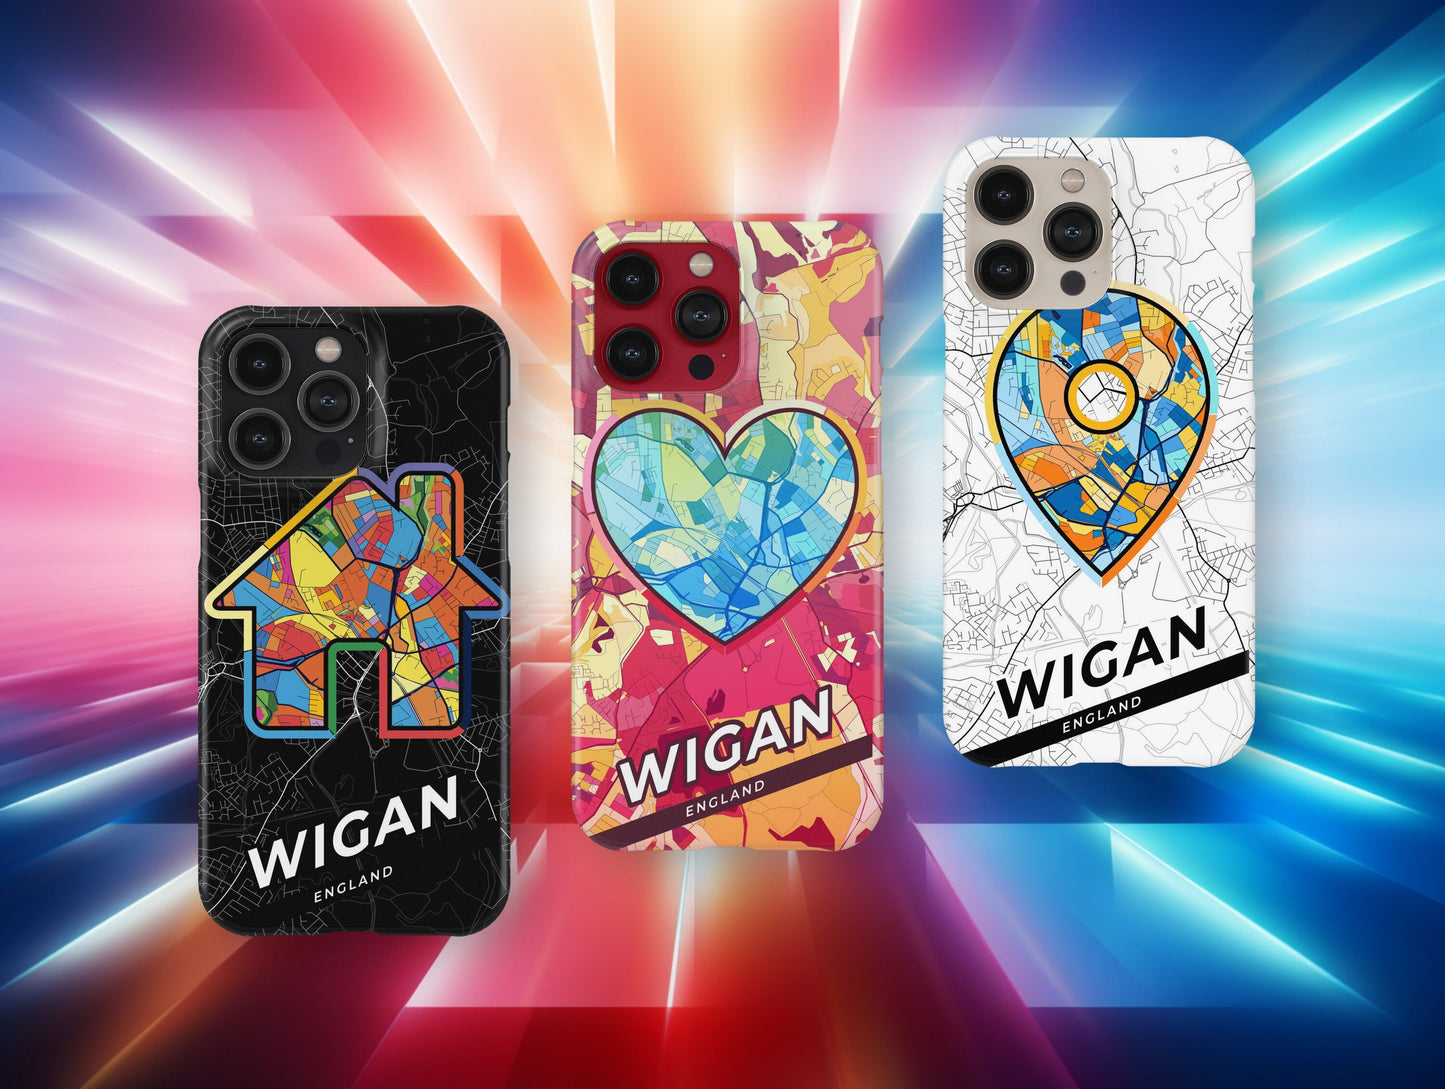 Wigan England slim phone case with colorful icon